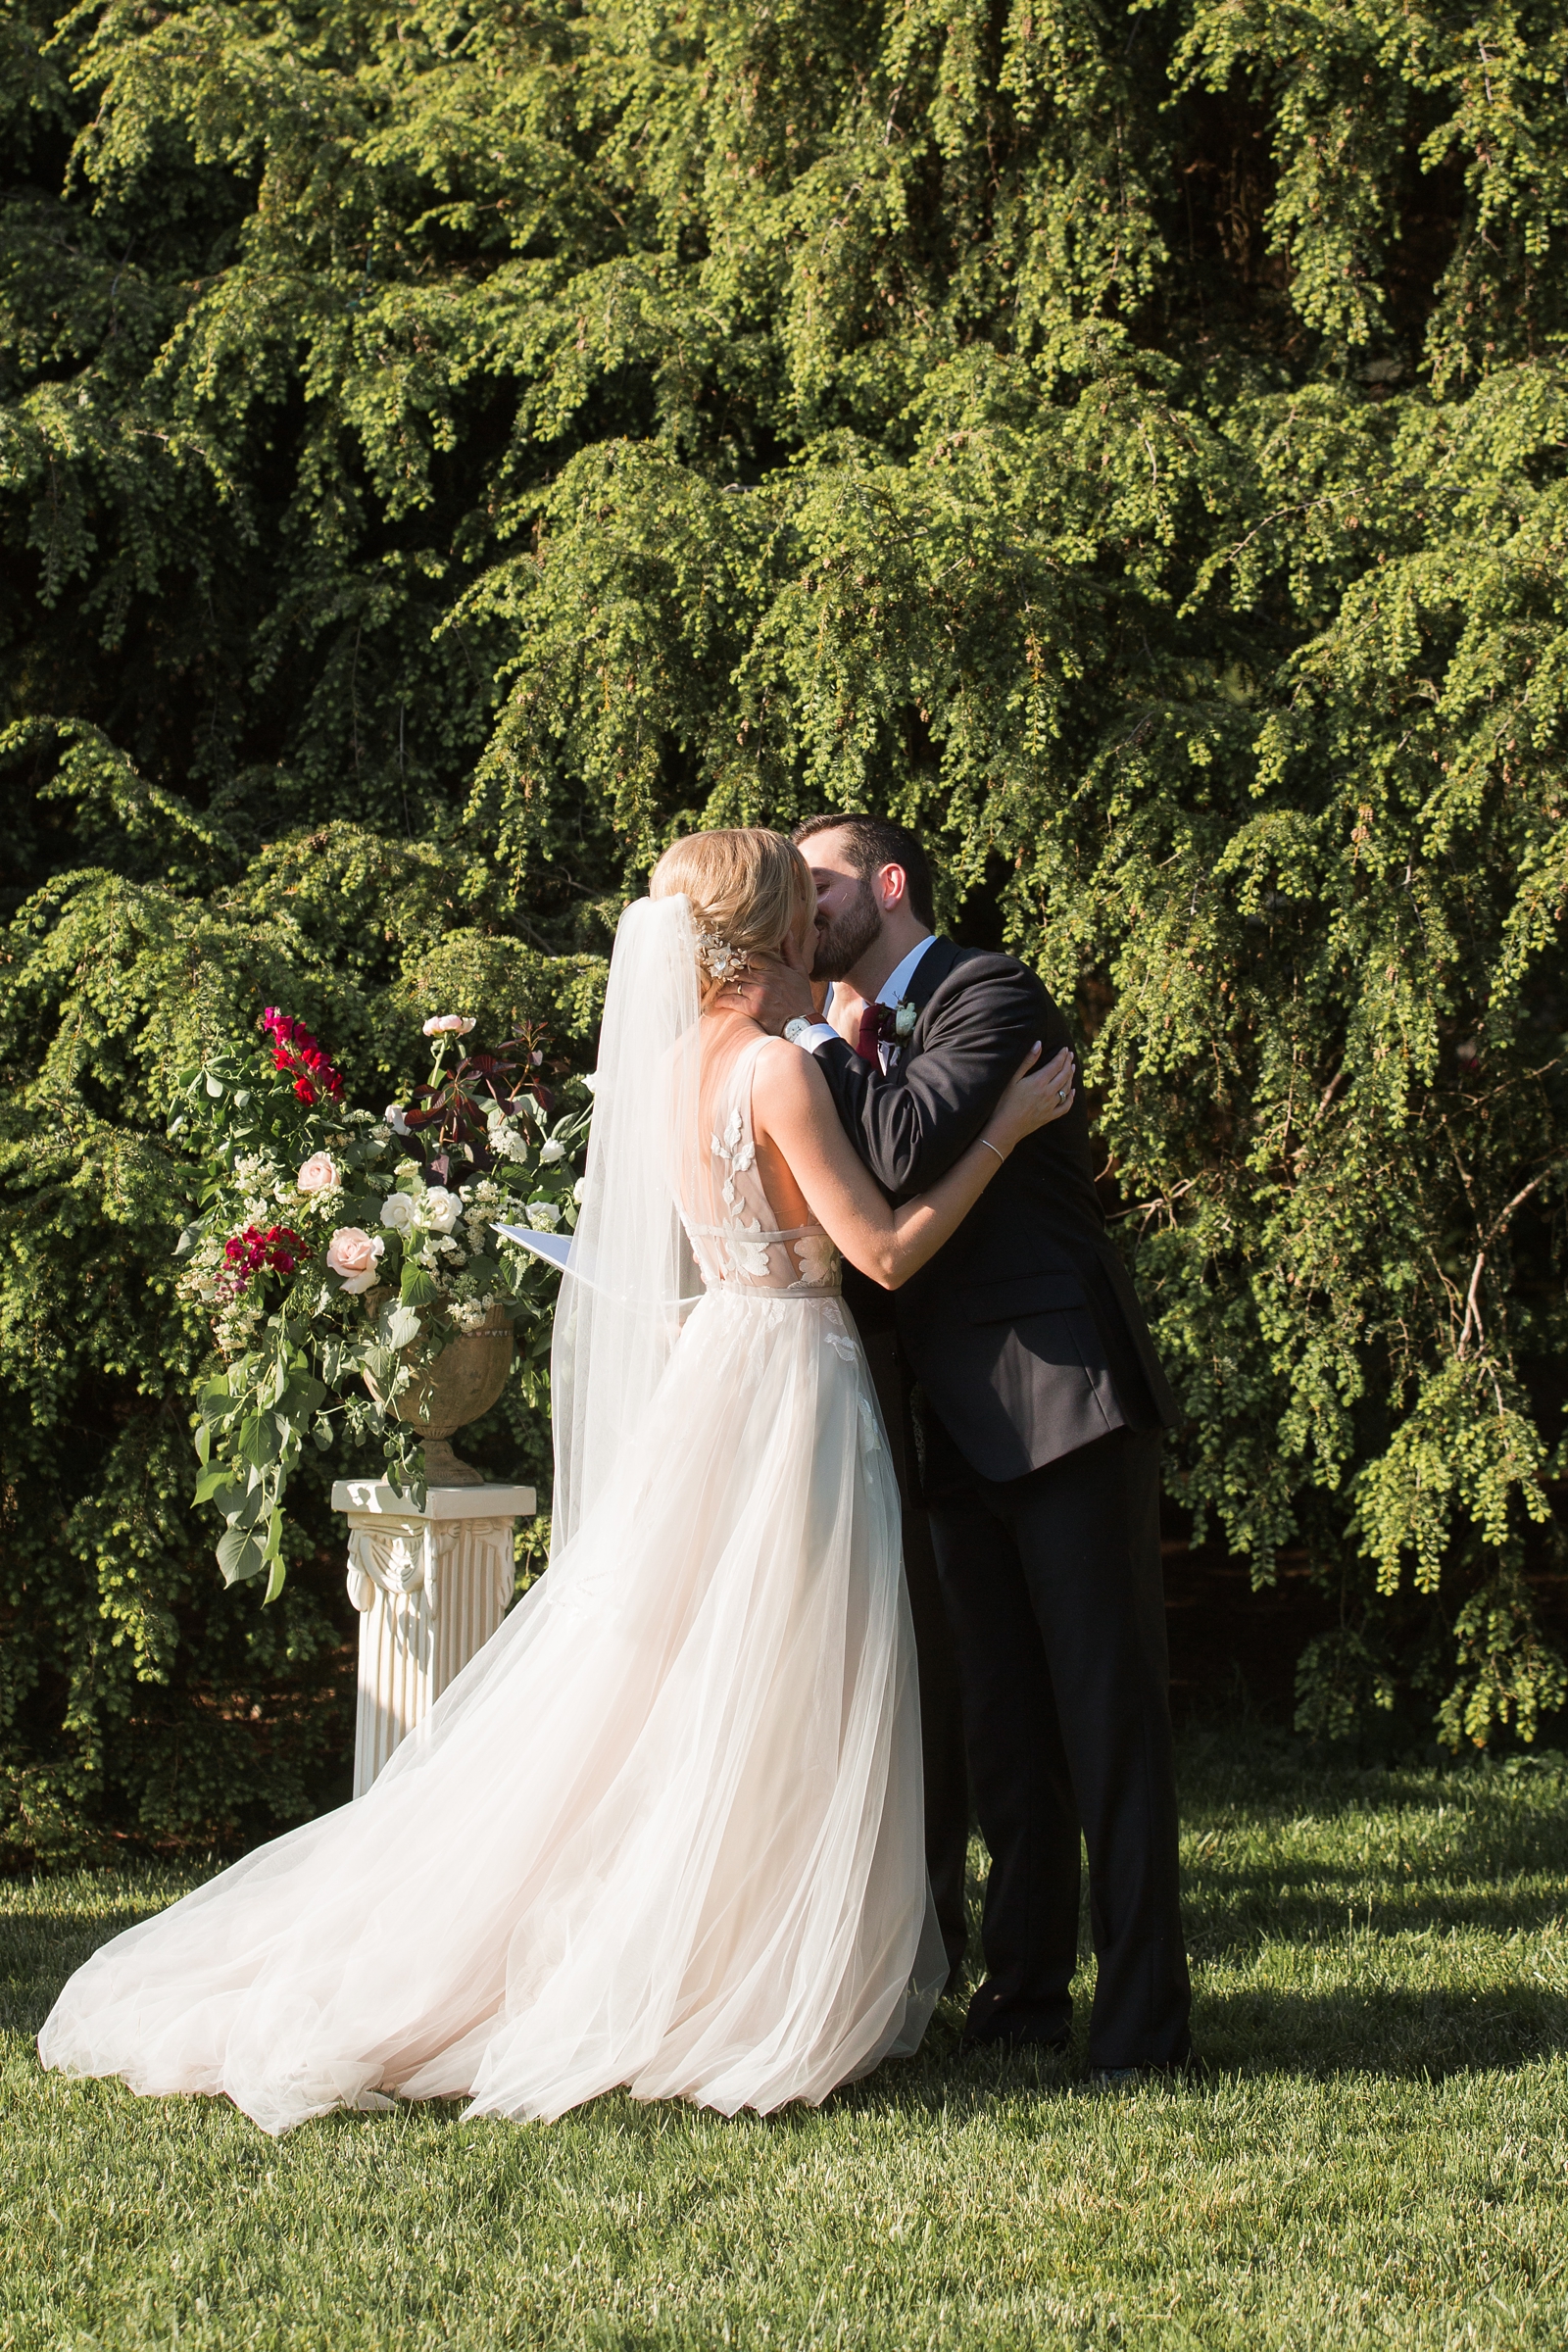 newlyweds kiss after lawn wedding ceremony at The Carriage House at Rockwood Park